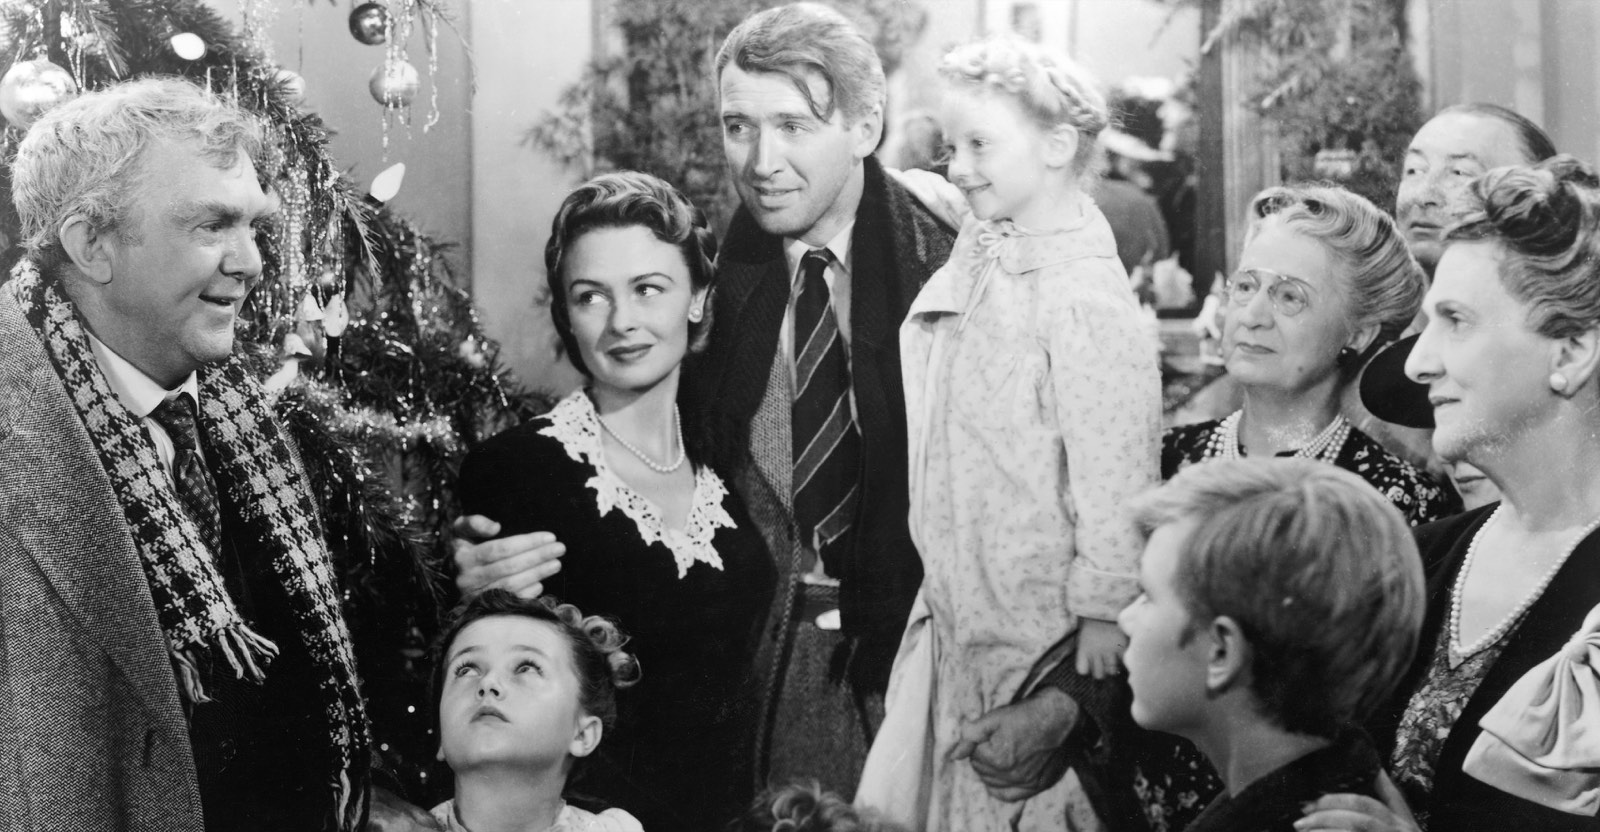 Accessible 4K version of It's a Wonderful Life now available